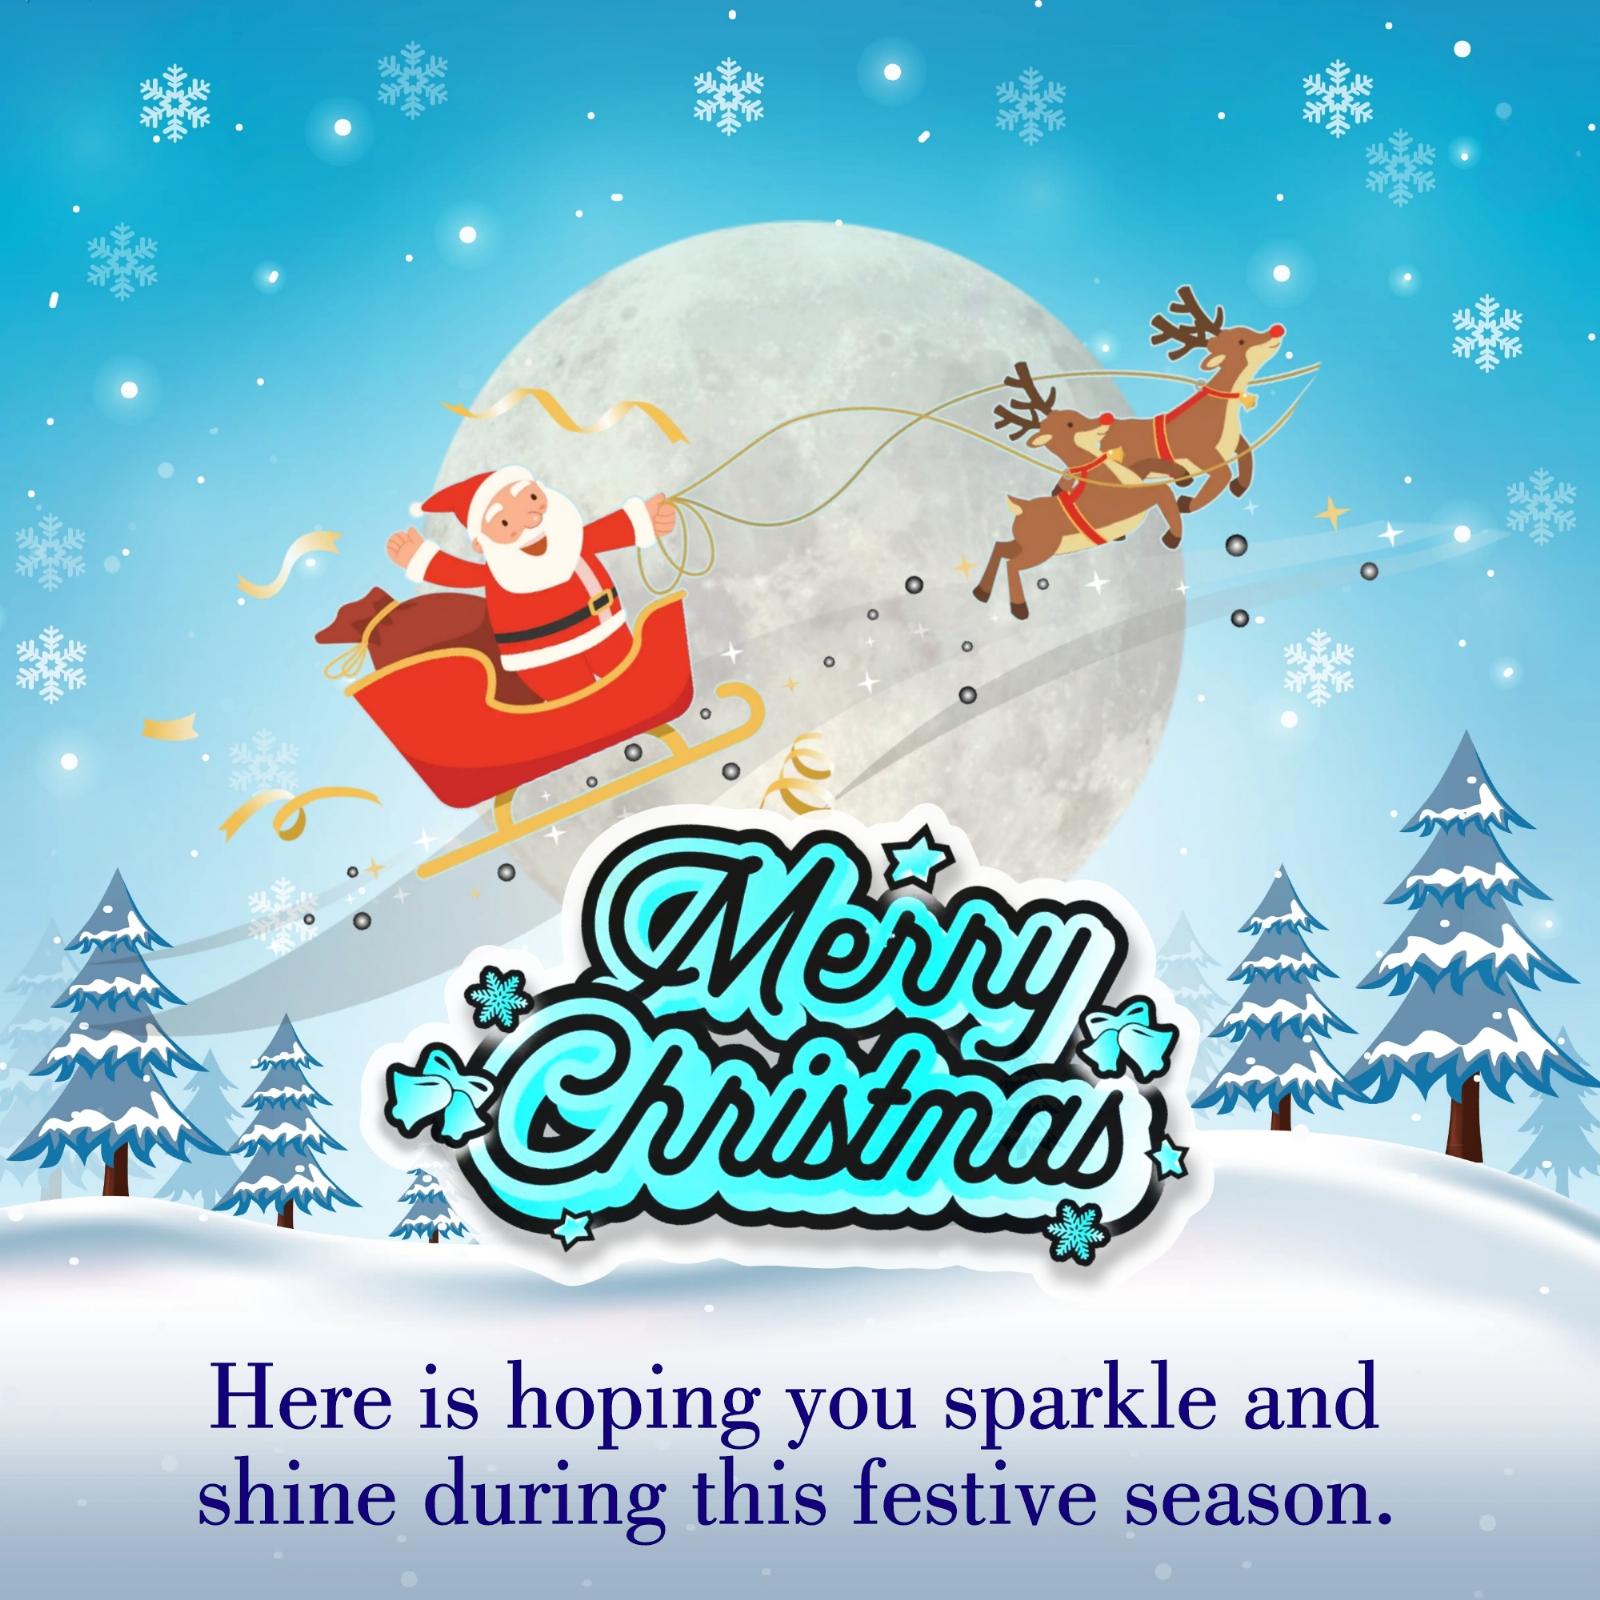 Here is hoping you sparkle and shine during this festive season